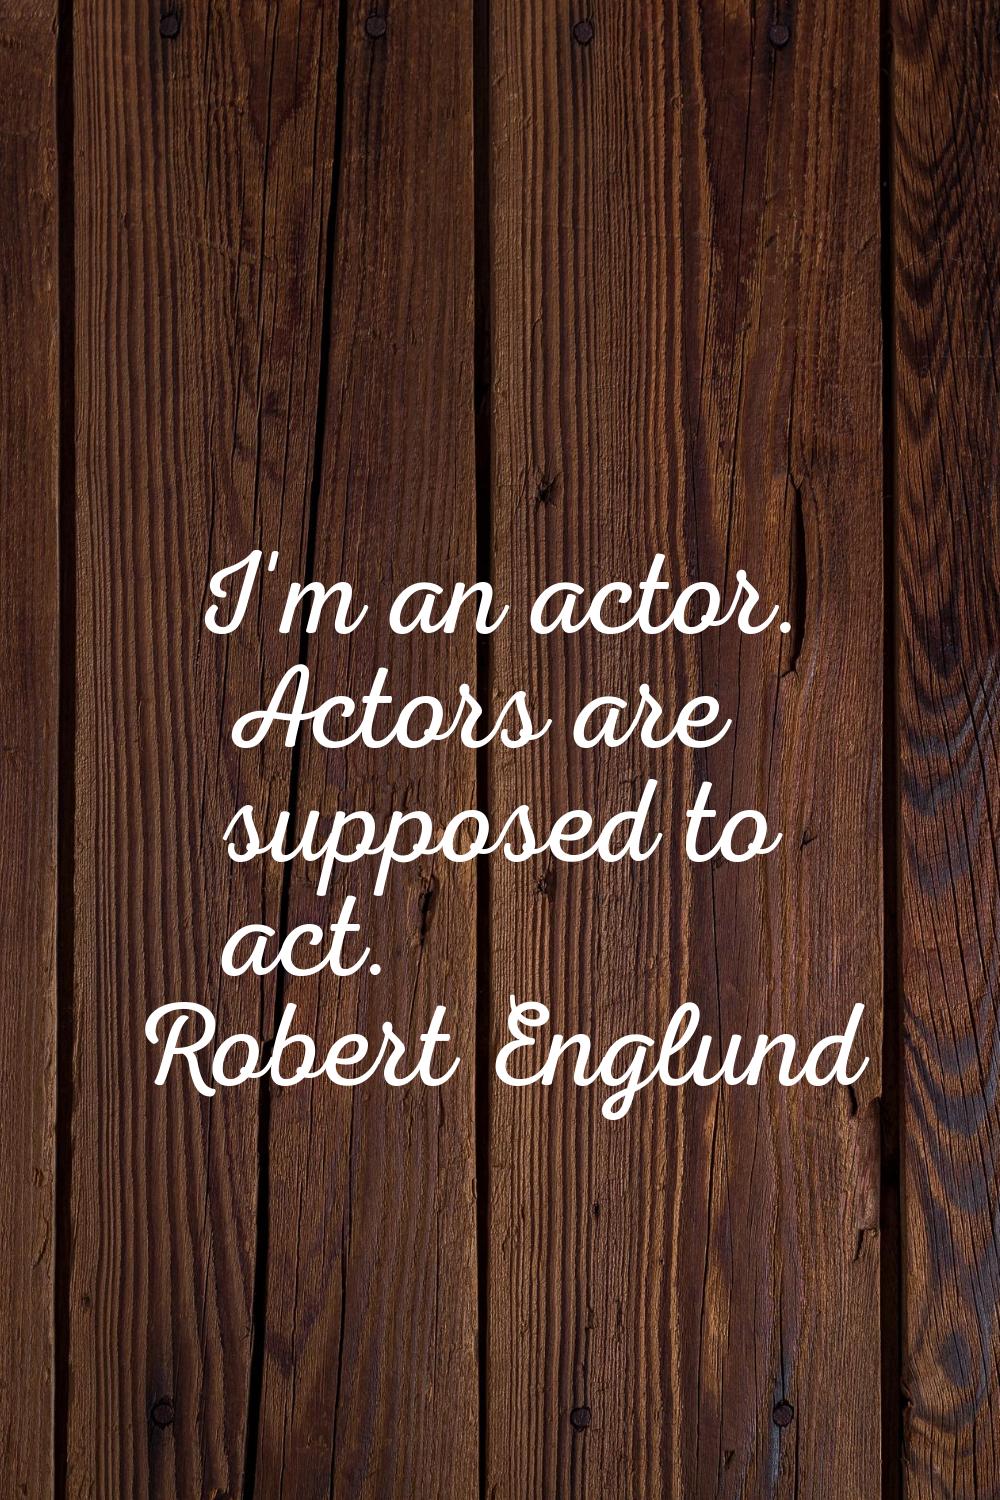 I'm an actor. Actors are supposed to act.